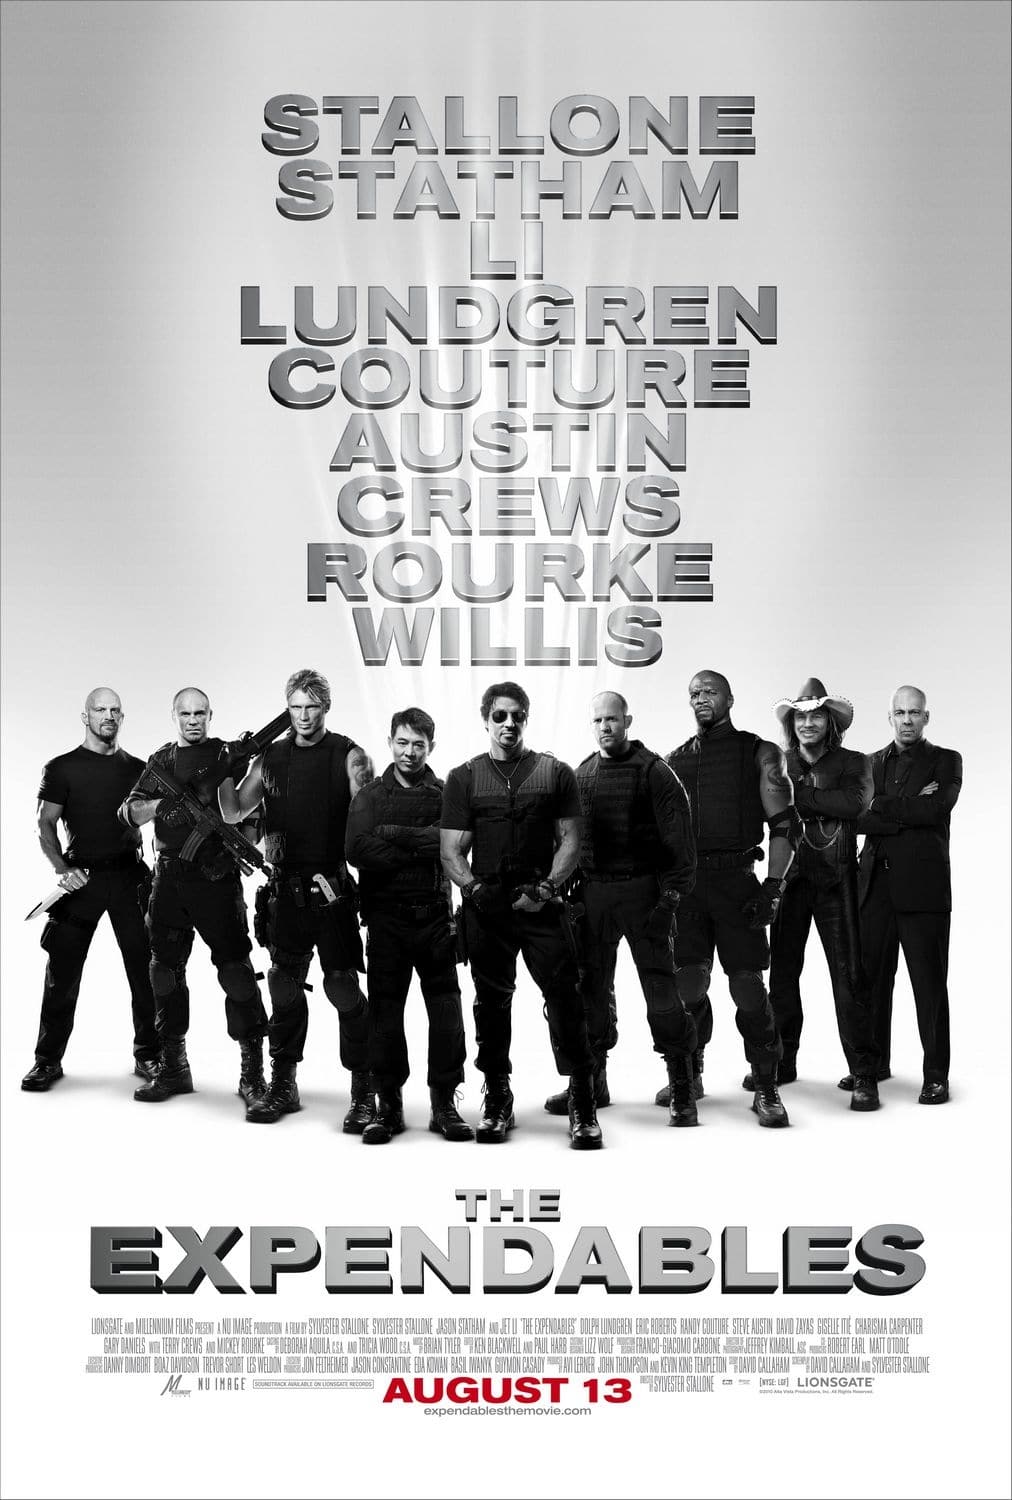 http://www.eklecty-city.fr/wp-content/uploads/2010/06/The-Expendables-Poster.jpg